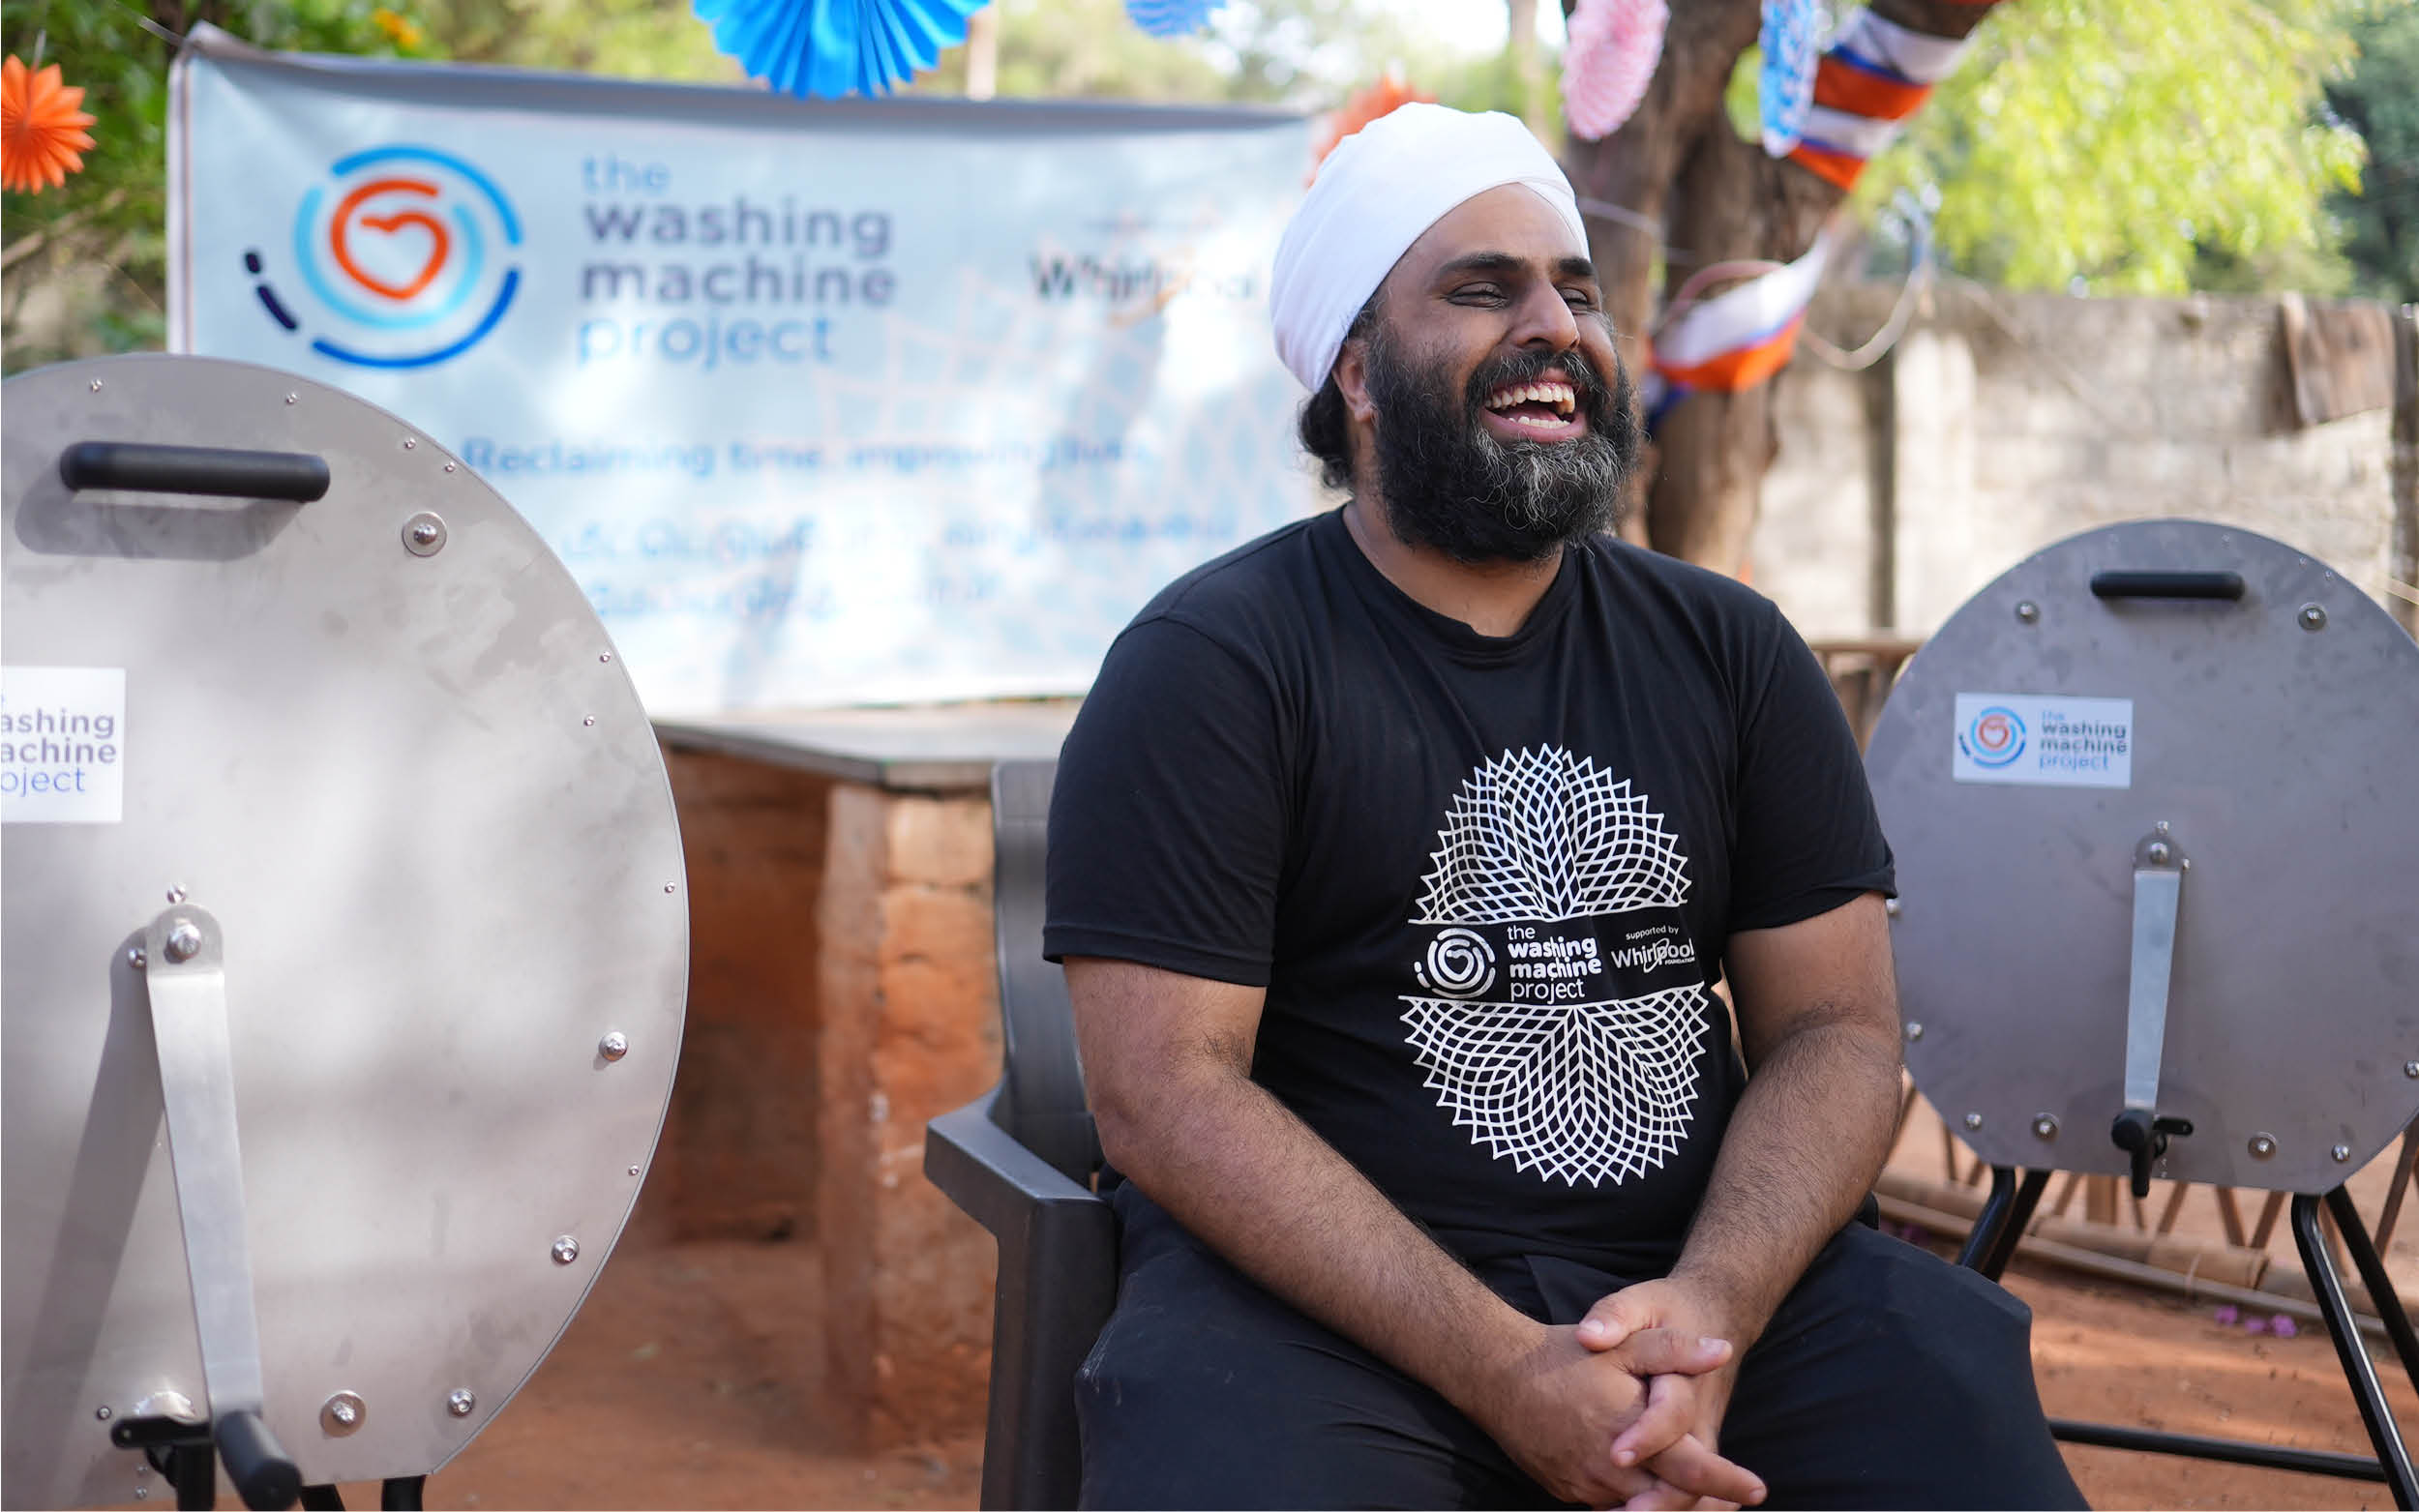 Half the Global Population Washes Clothes by Hand: Whirlpool Foundation, The Washing Machine Project Helping Address with Thousands of Manual Washing Machines 1